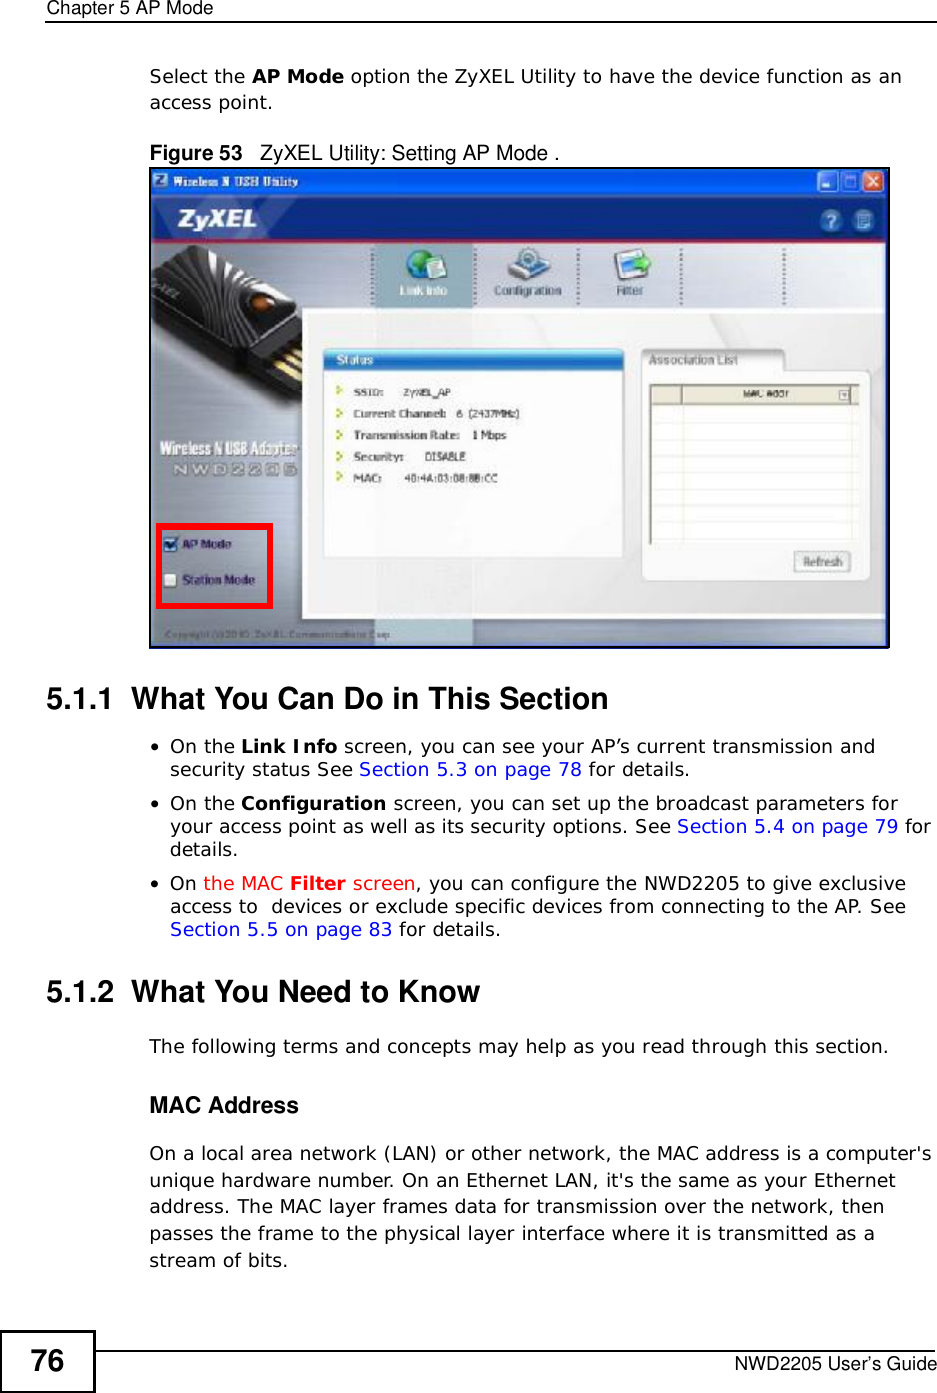 Chapter 5AP ModeNWD2205 User’s Guide76Select the AP Mode option the ZyXEL Utility to have the device function as an access point.Figure 53   ZyXEL Utility: Setting AP Mode .5.1.1  What You Can Do in This Section•On the Link Info screen, you can see your AP’s current transmission and security status See Section 5.3 on page 78 for details.•On the Configuration screen, you can set up the broadcast parameters for your access point as well as its security options. See Section 5.4 on page 79 for details.•On the MAC Filter screen, you can configure the NWD2205 to give exclusive access to  devices or exclude specific devices from connecting to the AP. See Section 5.5 on page 83 for details.5.1.2  What You Need to KnowThe following terms and concepts may help as you read through this section.MAC AddressOn a local area network (LAN) or other network, the MAC address is a computer&apos;s unique hardware number. On an Ethernet LAN, it&apos;s the same as your Ethernet address. The MAC layer frames data for transmission over the network, then passes the frame to the physical layer interface where it is transmitted as a stream of bits.